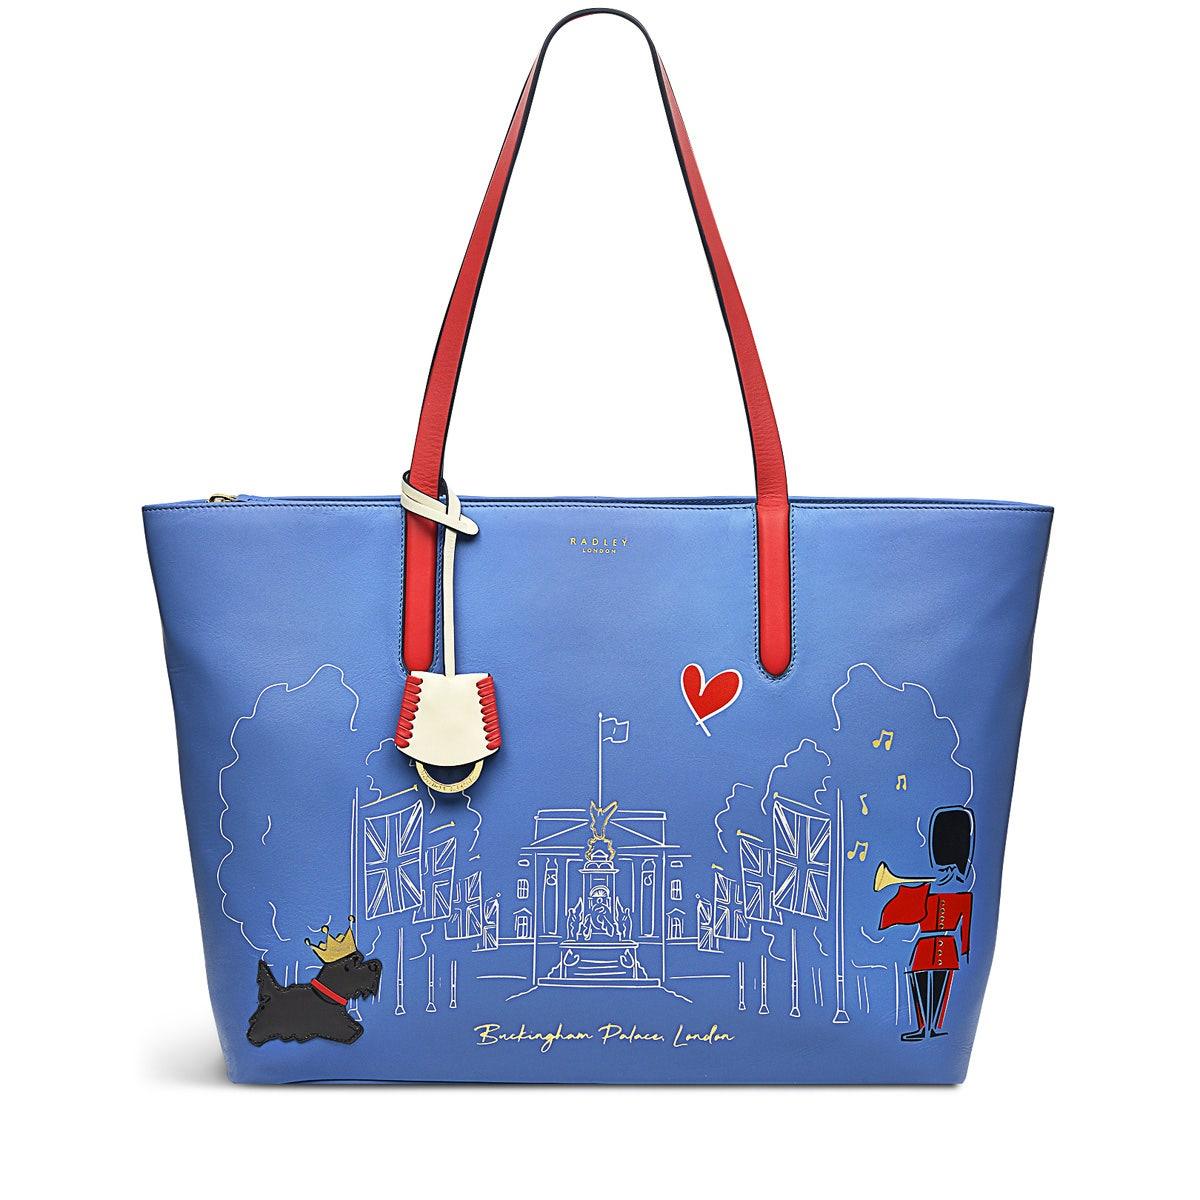 THE CORONATION - PALACE - Large Ziptop Tote - RUTHERFORD & Co